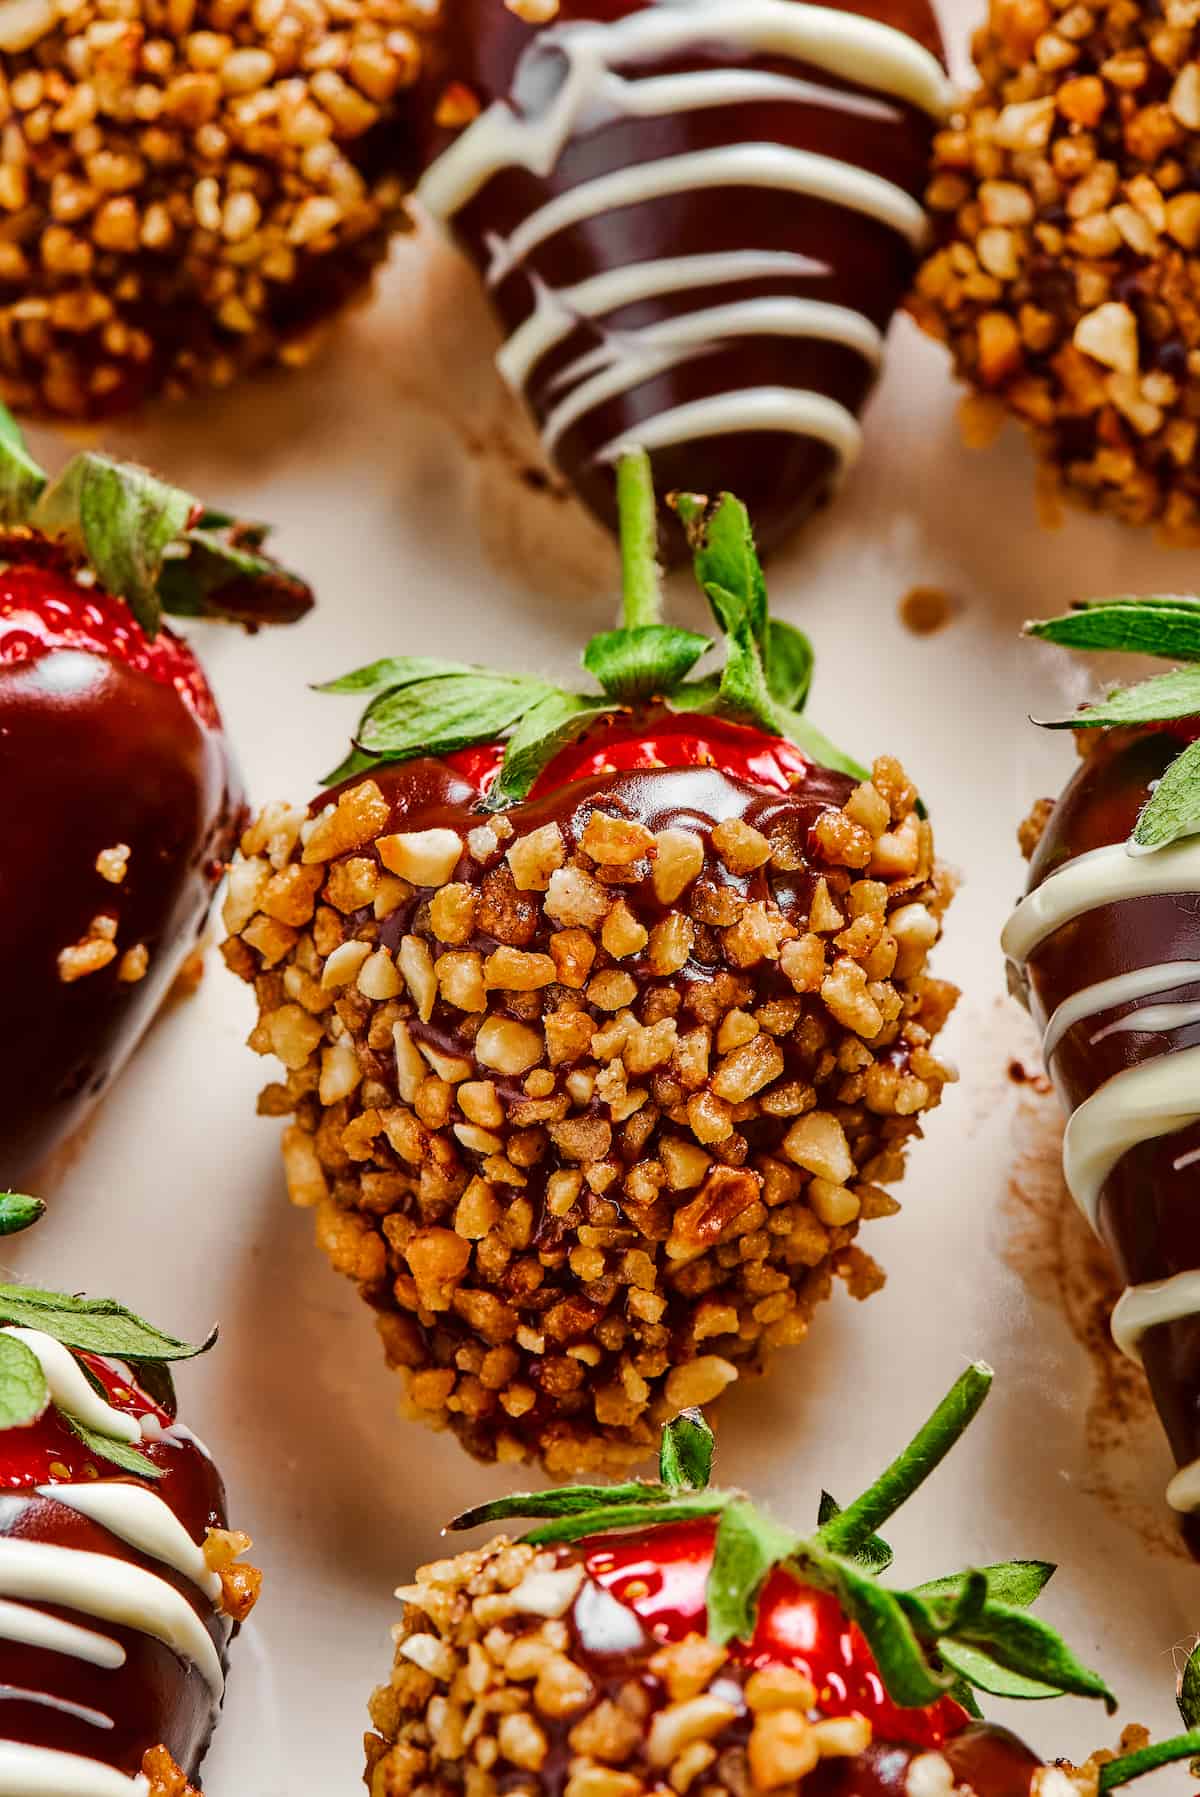 A strawberry dipped in chocolate and coated in chopped nuts.